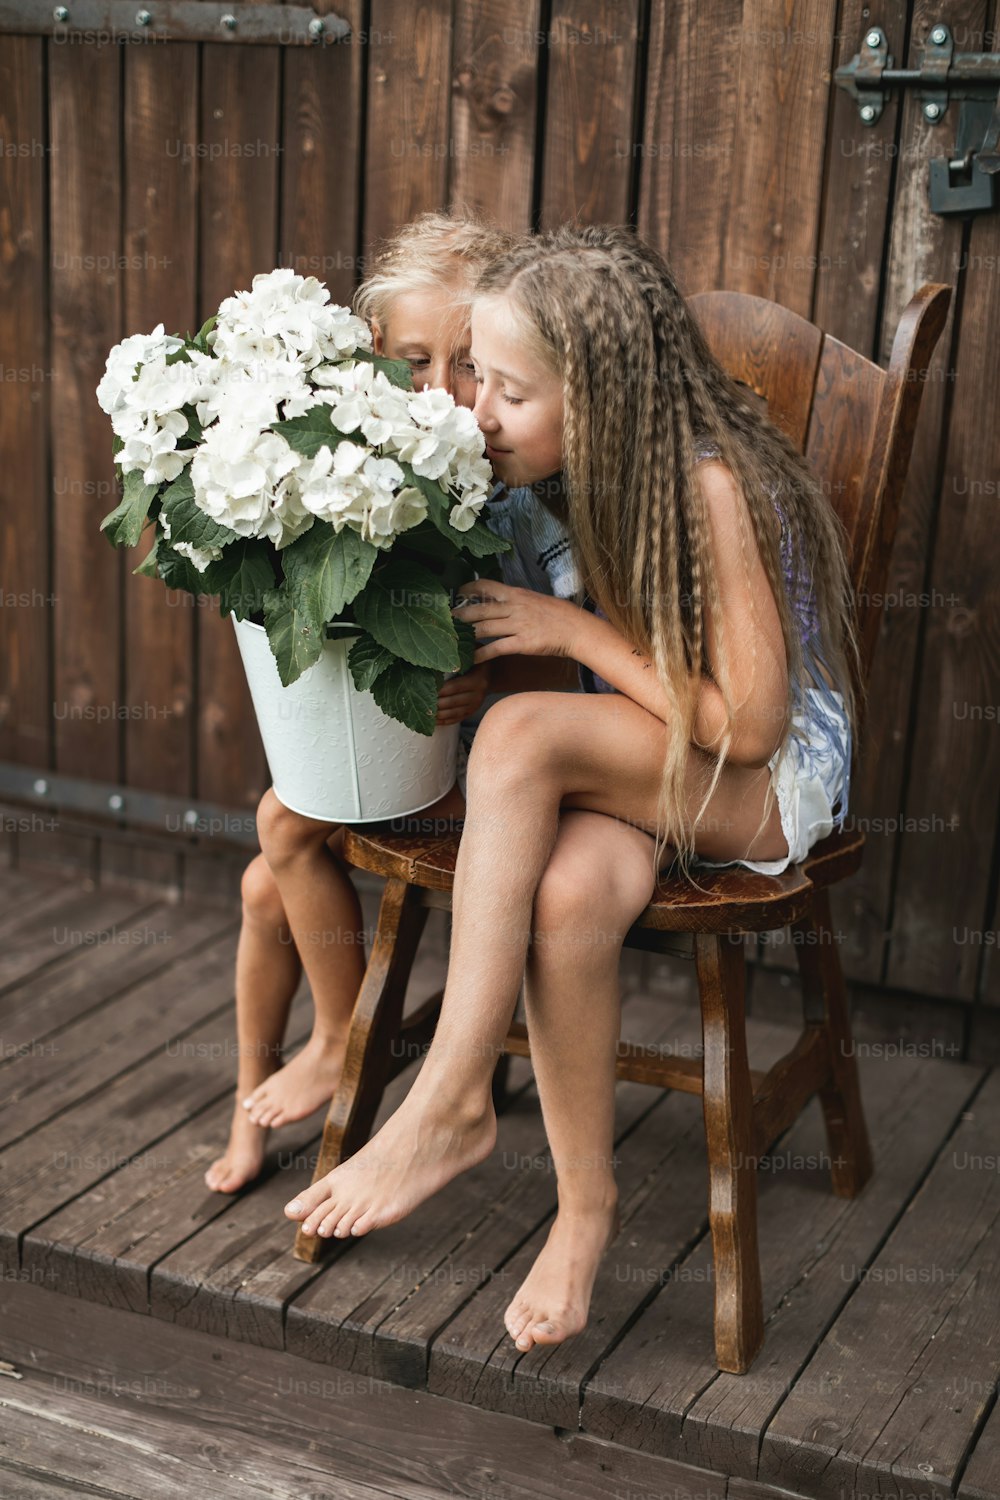 Children and flowers, summer, countryside and fun. Summer holiday. Two pretty little girls sitting on the chair in front of wooden barn and smelling hydrangea flowers in big white bucket.